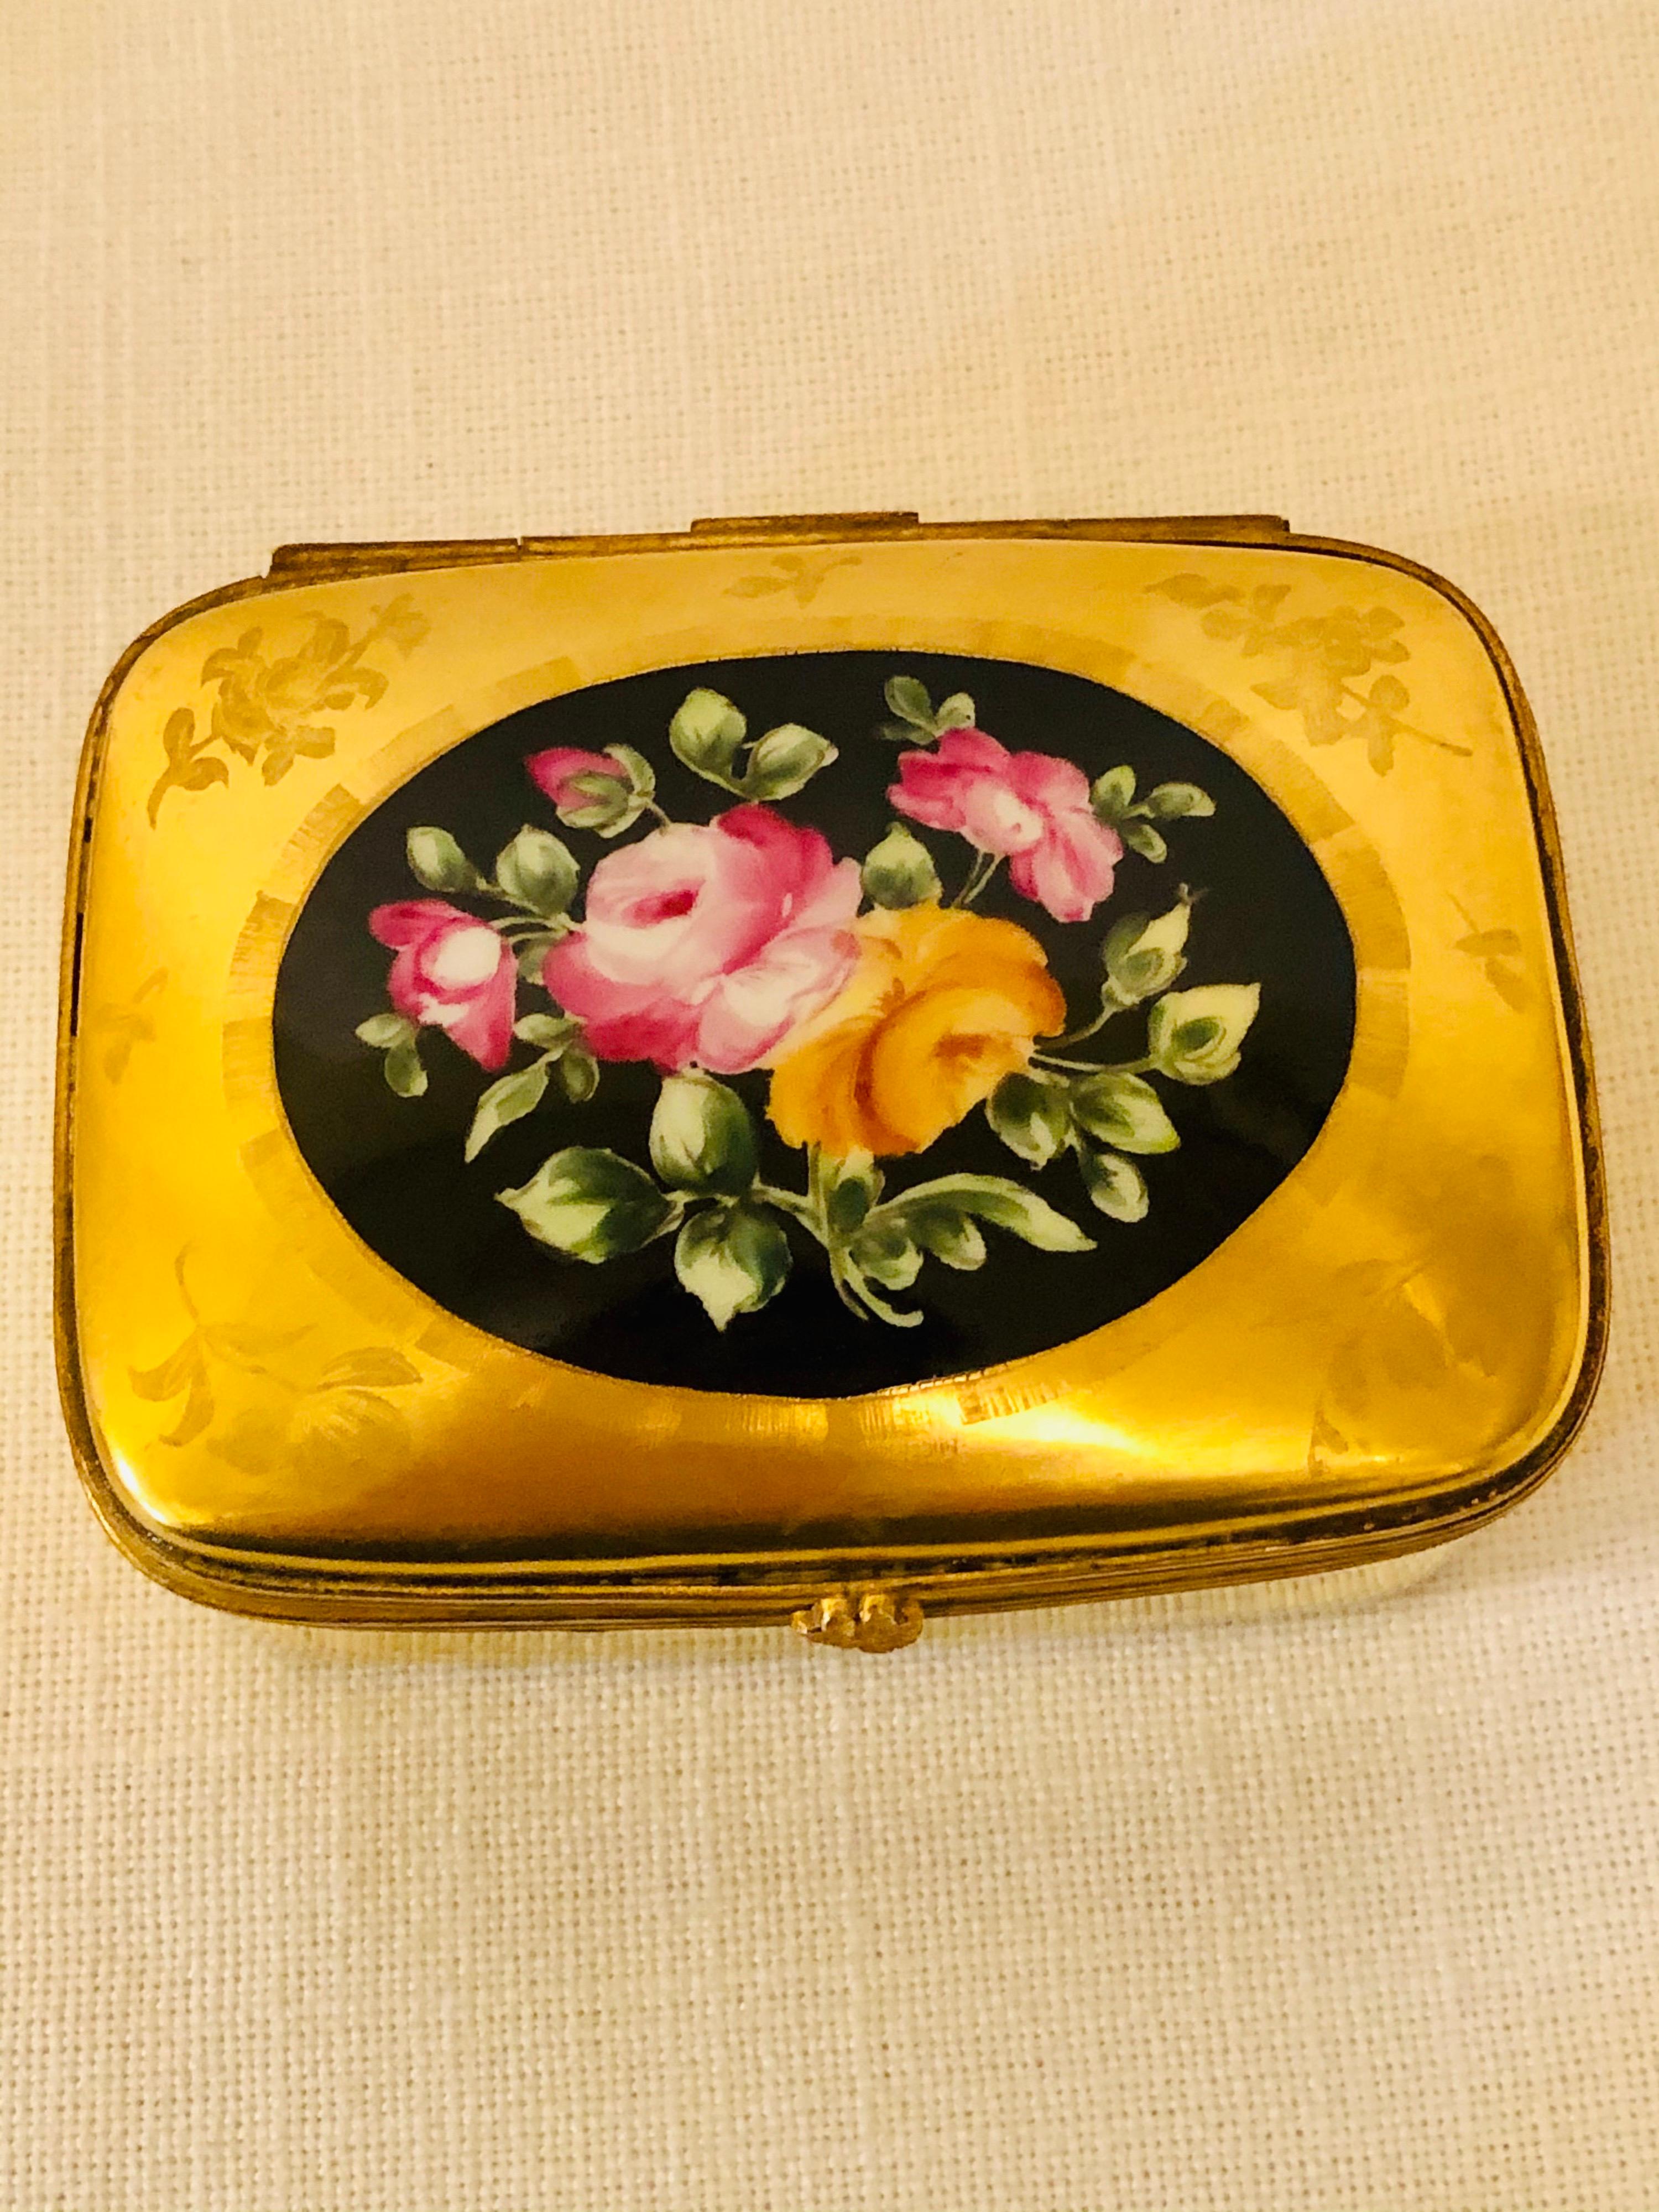 Rococo Le Tallec Box with a Gold BackGround and a Central Painting of a Flower Bouquet